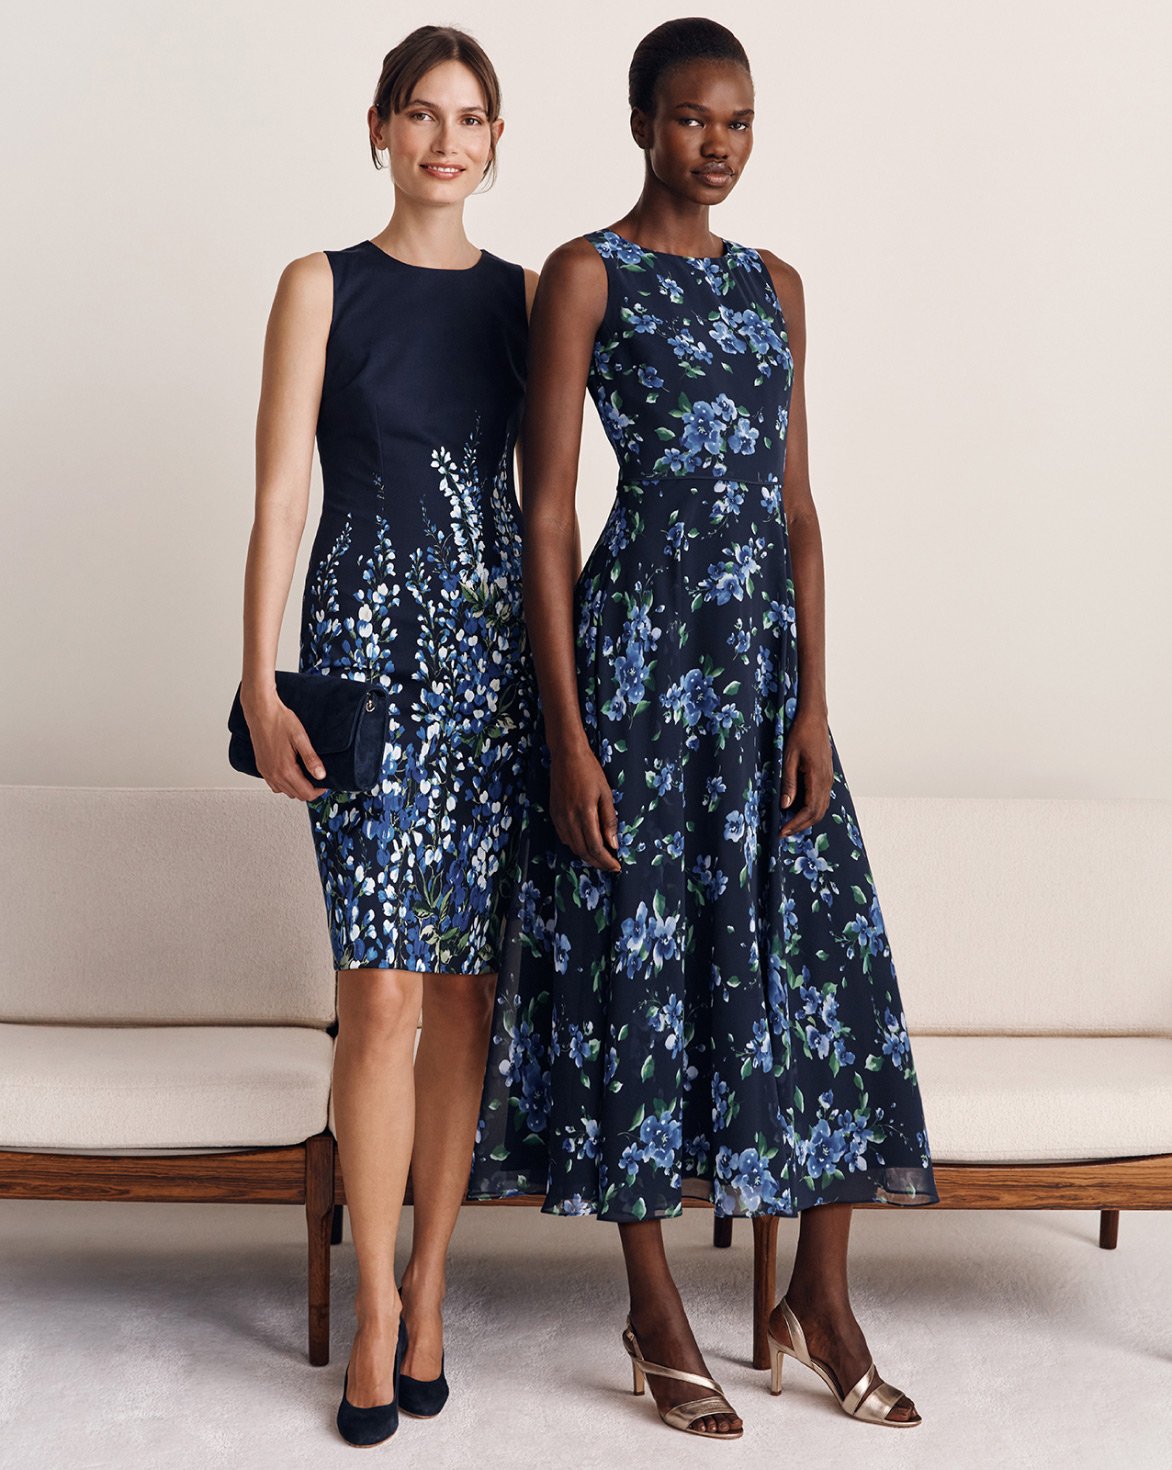 Hobbs models stand in front of a cream sofa wearing floral occasion dresses.